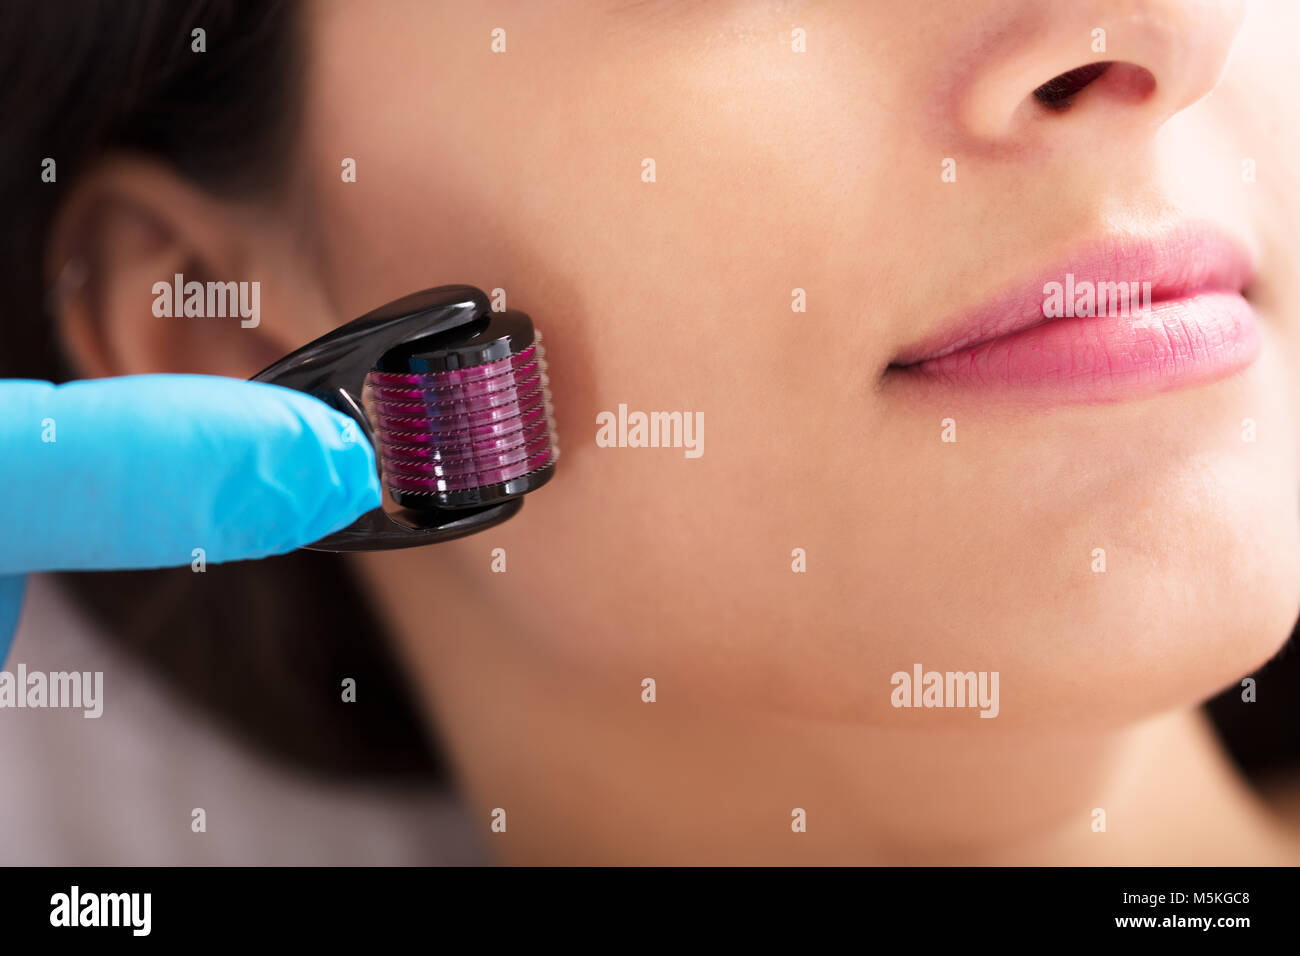 Close-up Of A Woman Having Facial Treatment On Her Face In Beauty Salon Stock Photo